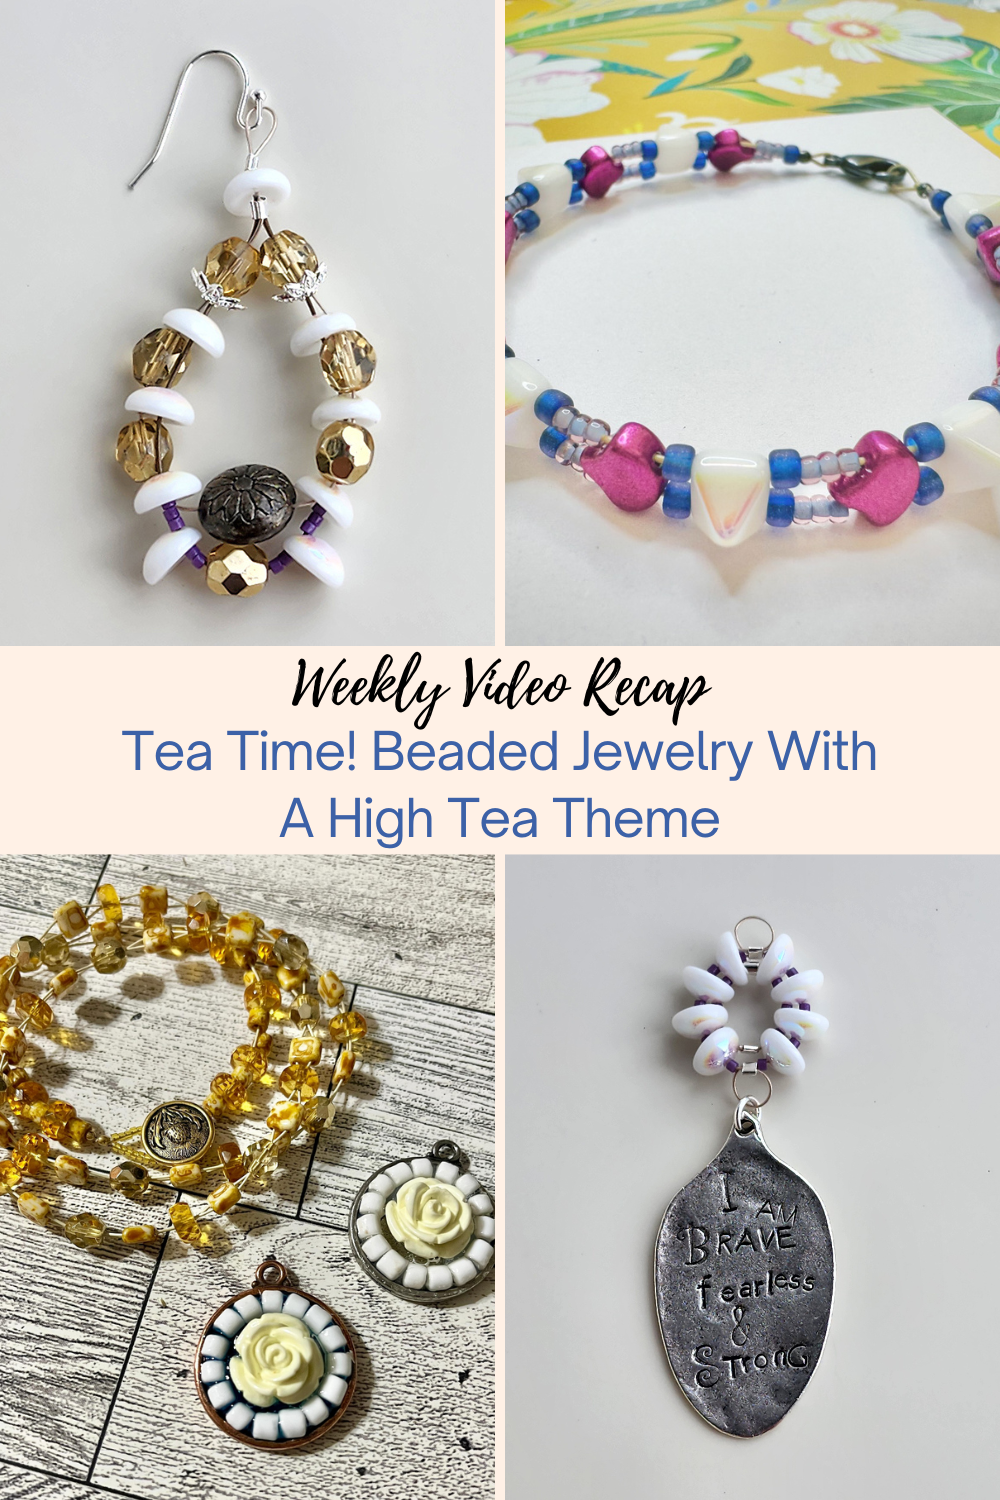 Tea Time! Beaded Jewelry With A High Tea Theme Collage